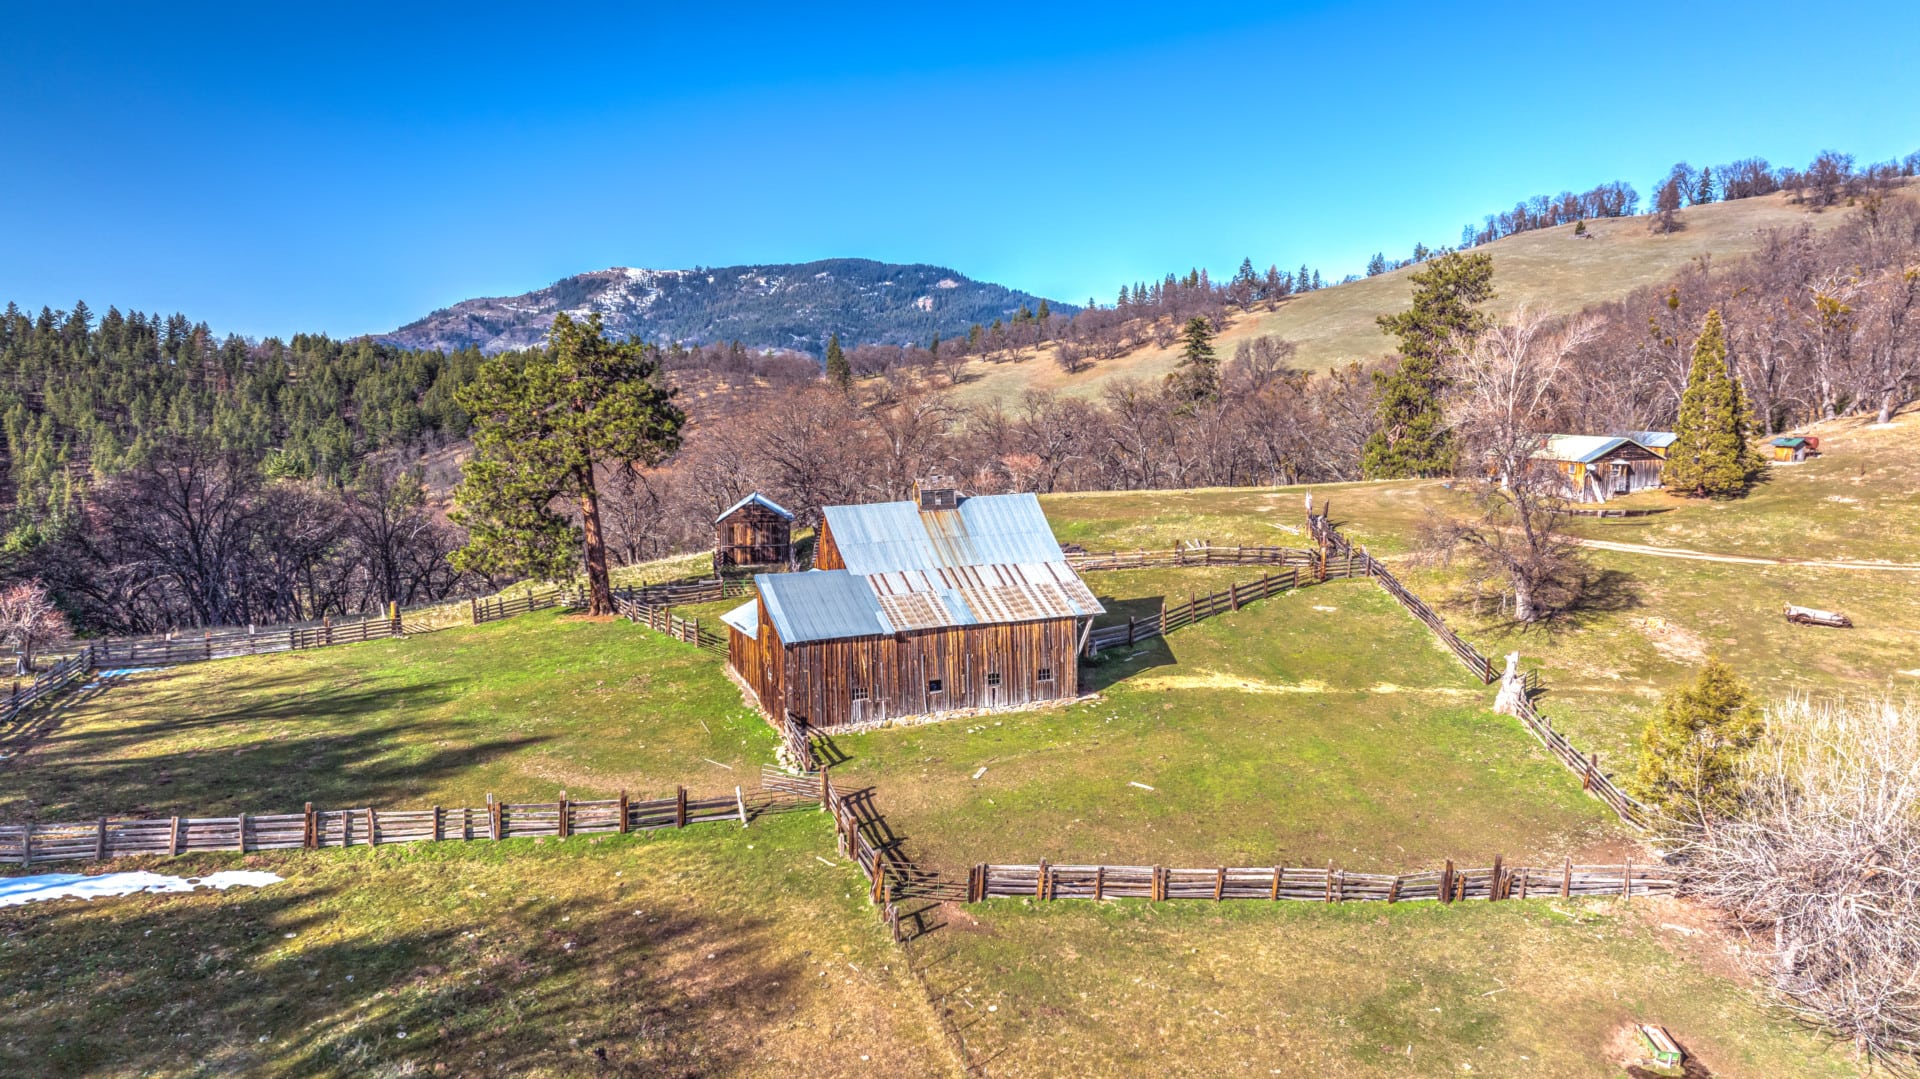 Cattle Ranch For Sale Oregon The Legend Of Cove Creek Ranch 2 